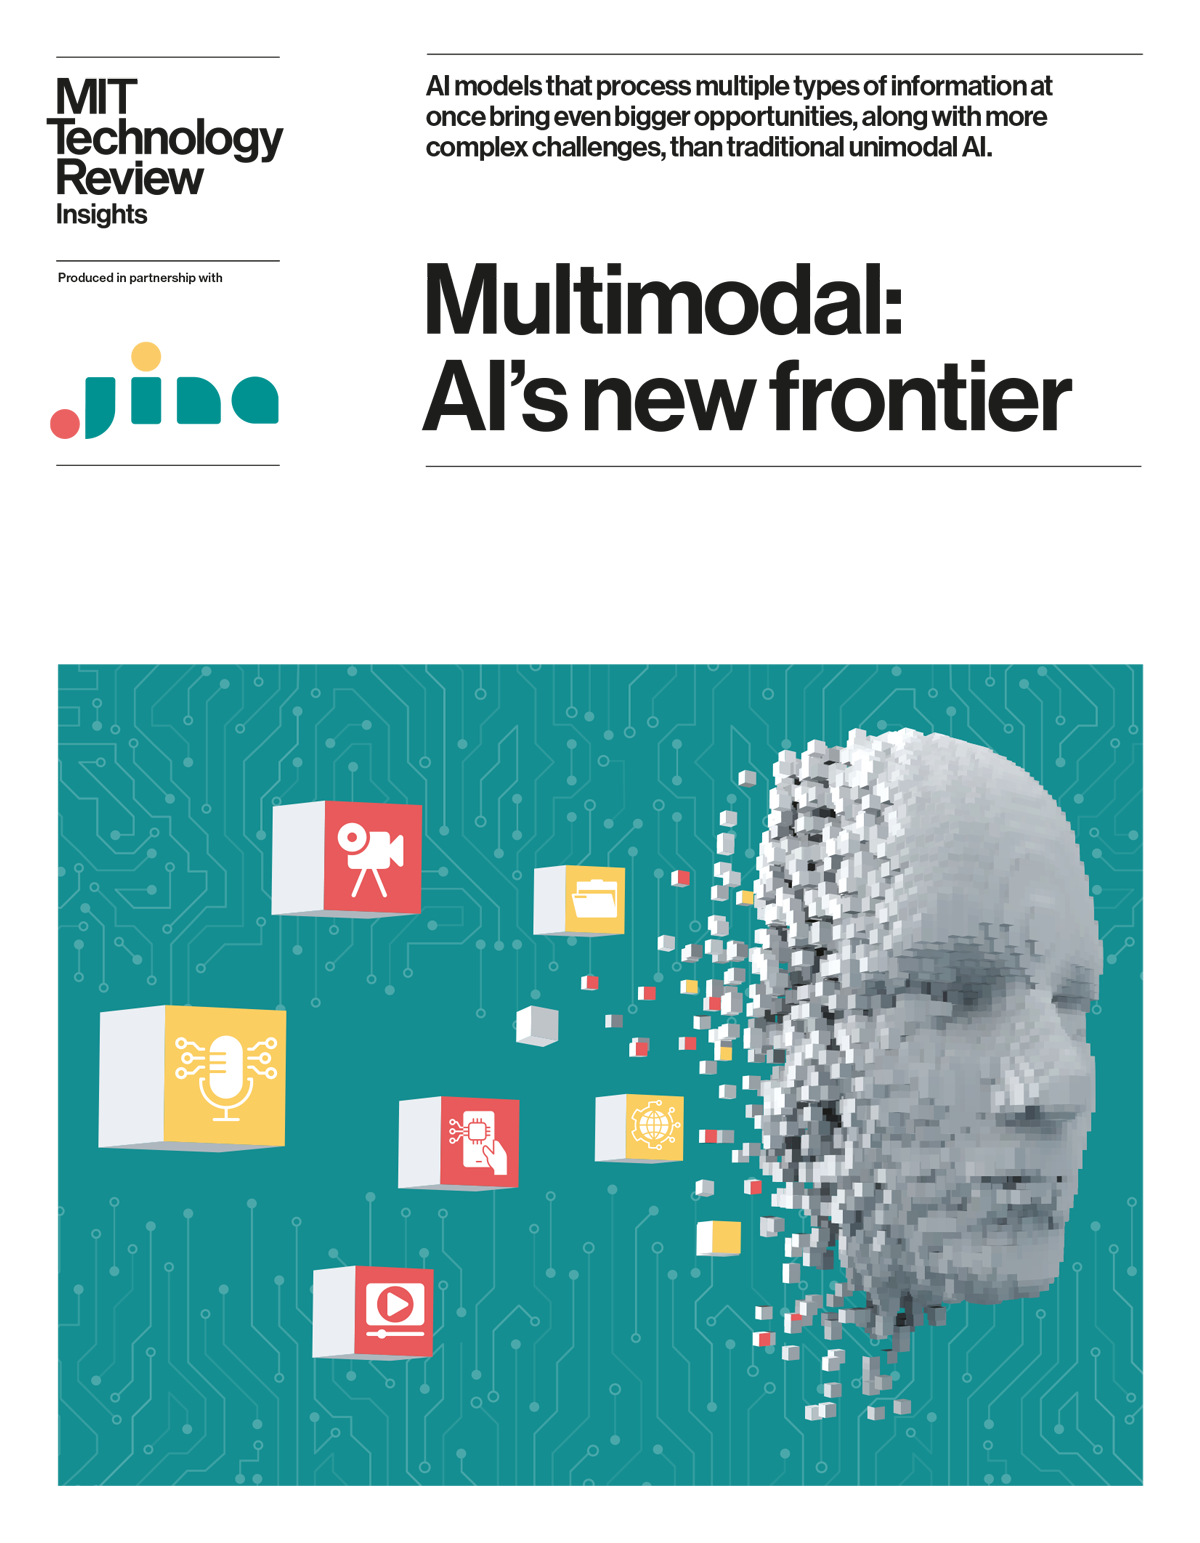 Multimodal: AI’s new frontier